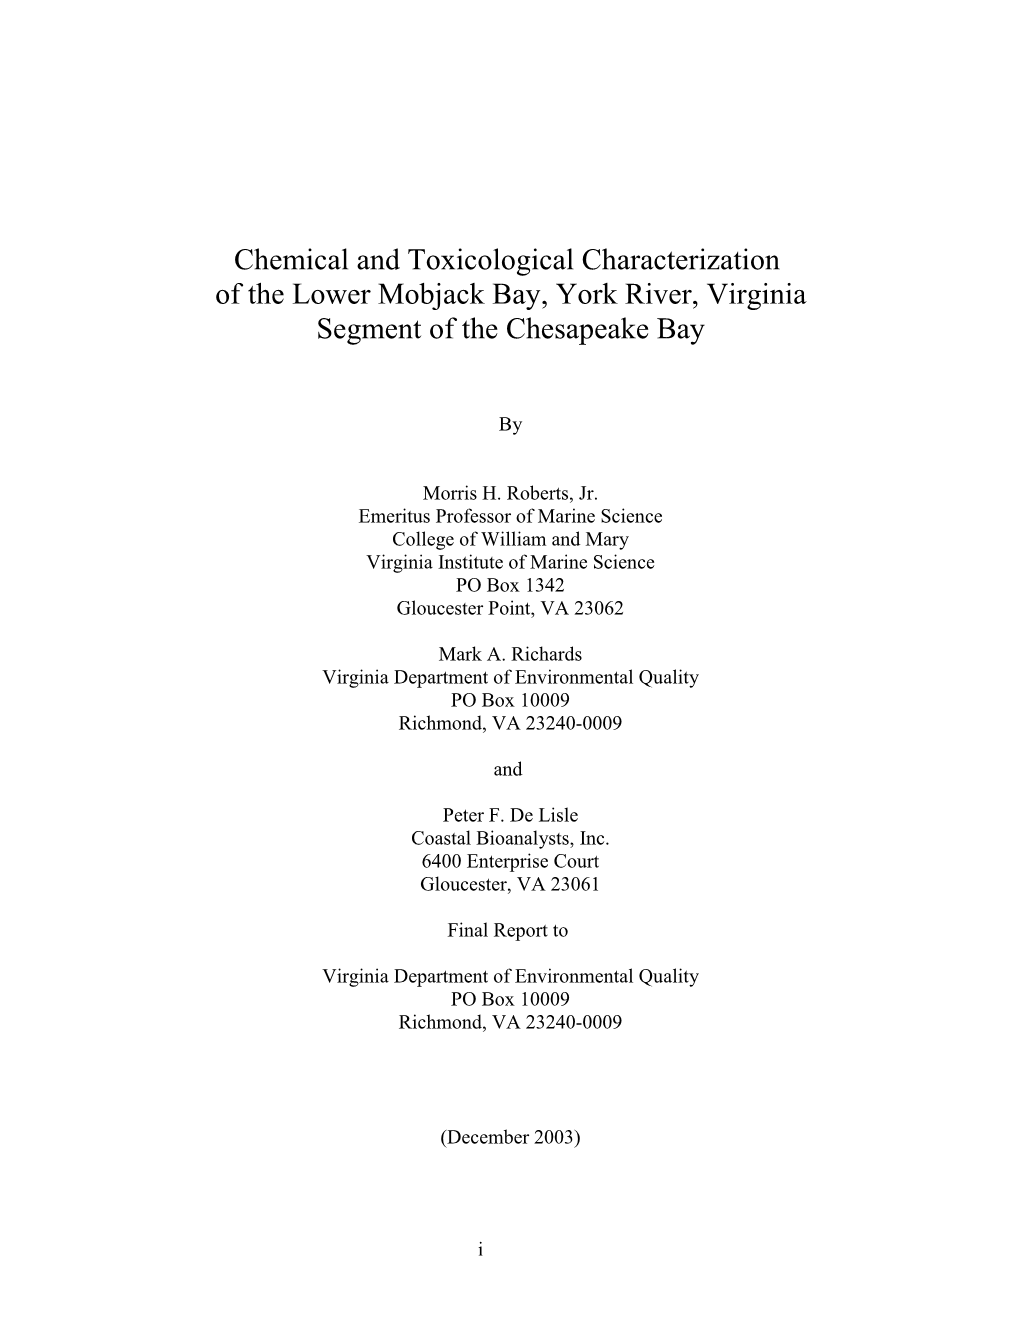 Chemical and Toxicological Characterization of the Lower Mobjack Bay, York River, Virginia Segment of the Chesapeake Bay